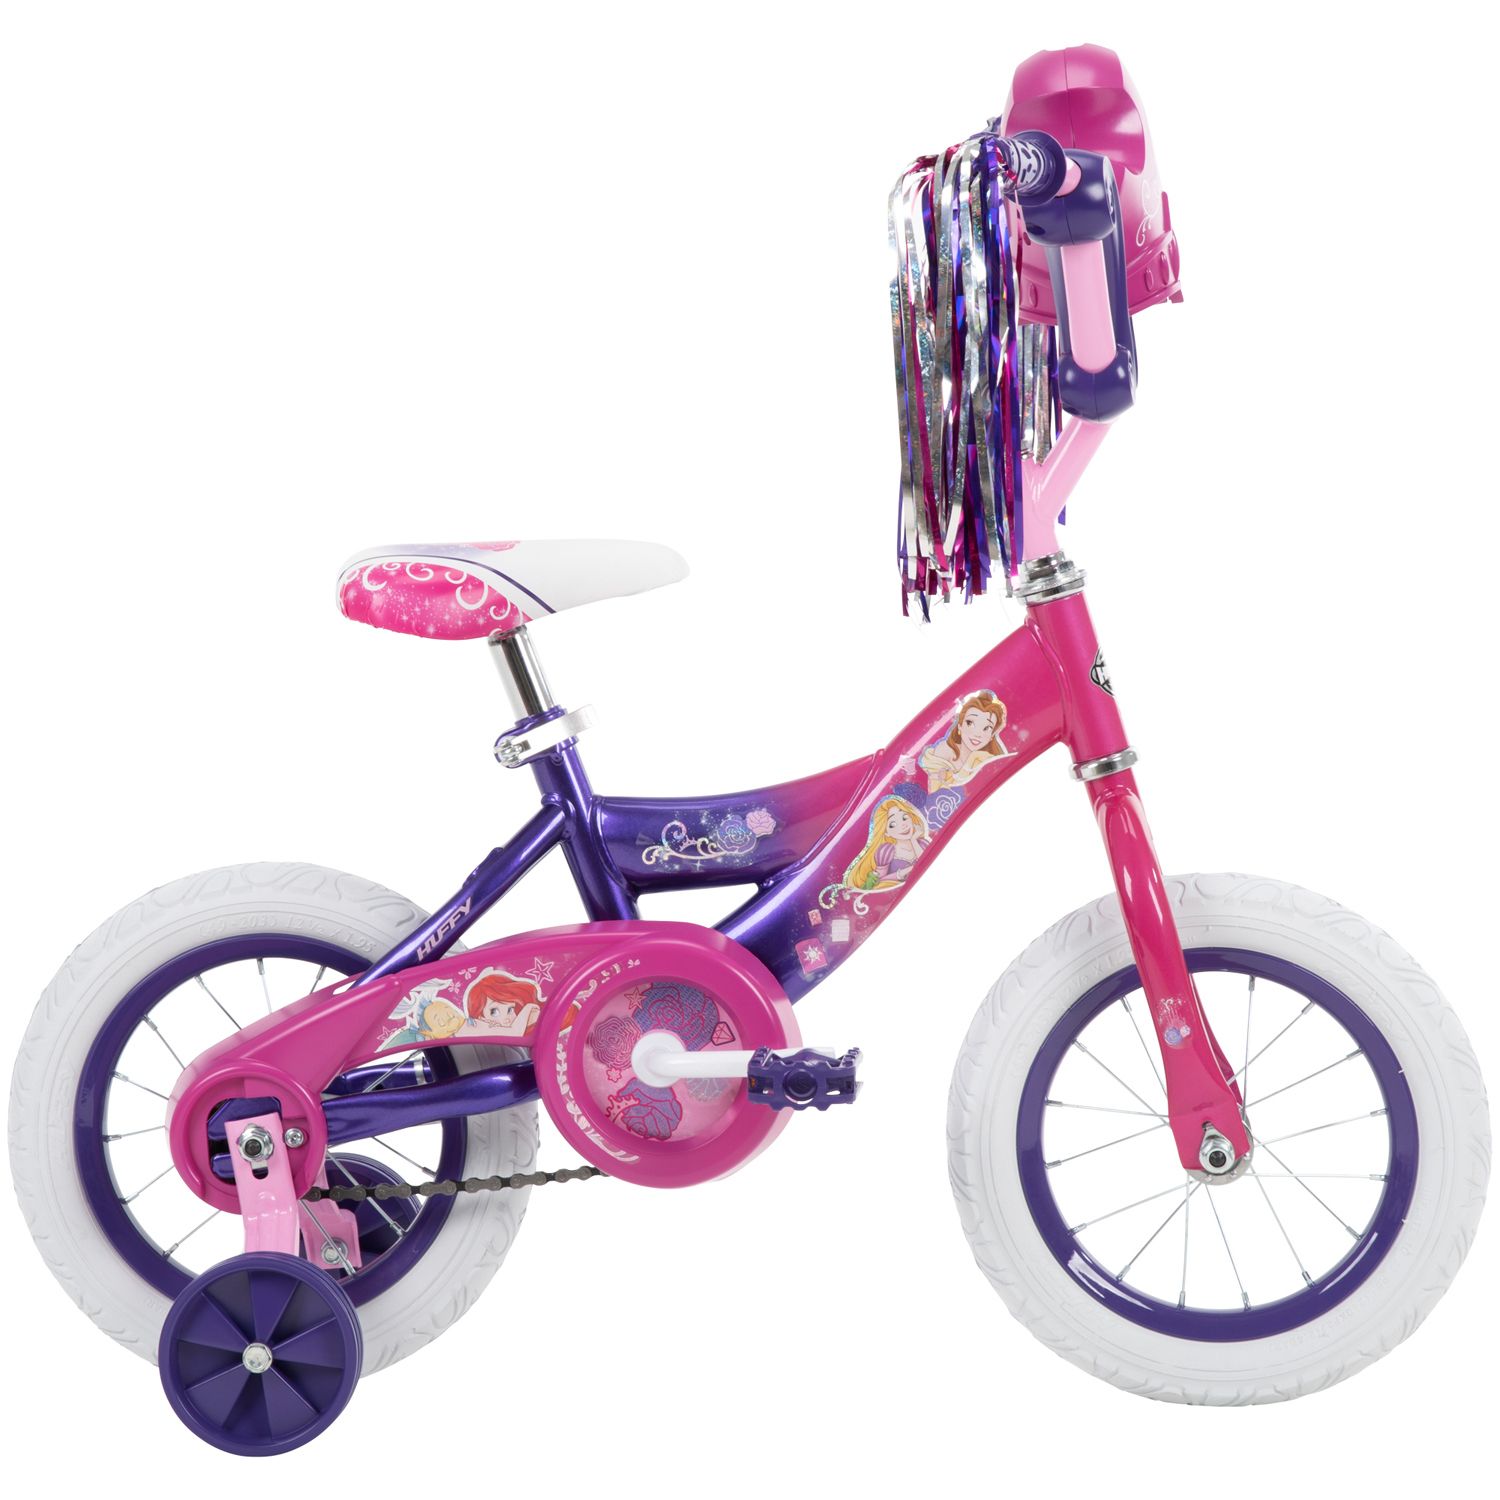 Image for Huffy Disney Princess 12-Inch Bike by at Kohl's.